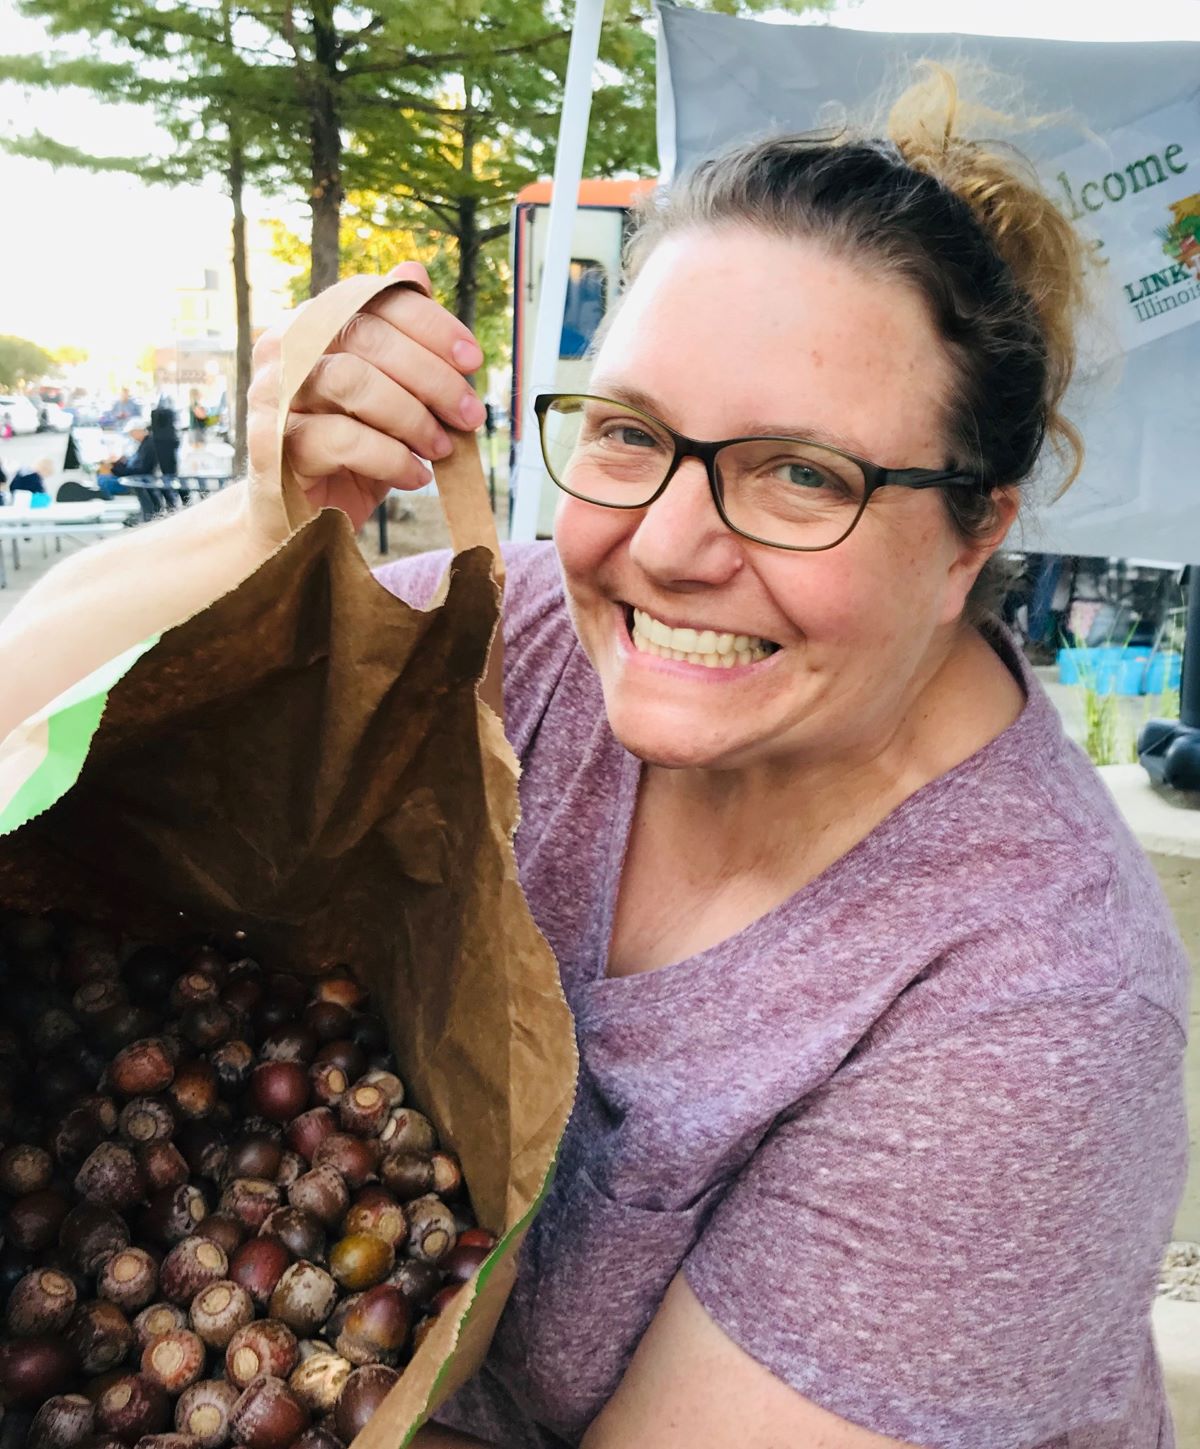 Heidi is wearing a purple shirt and black glasses.  She is holding open a brown paper bag of acorns. Photo by Eliana Brown.